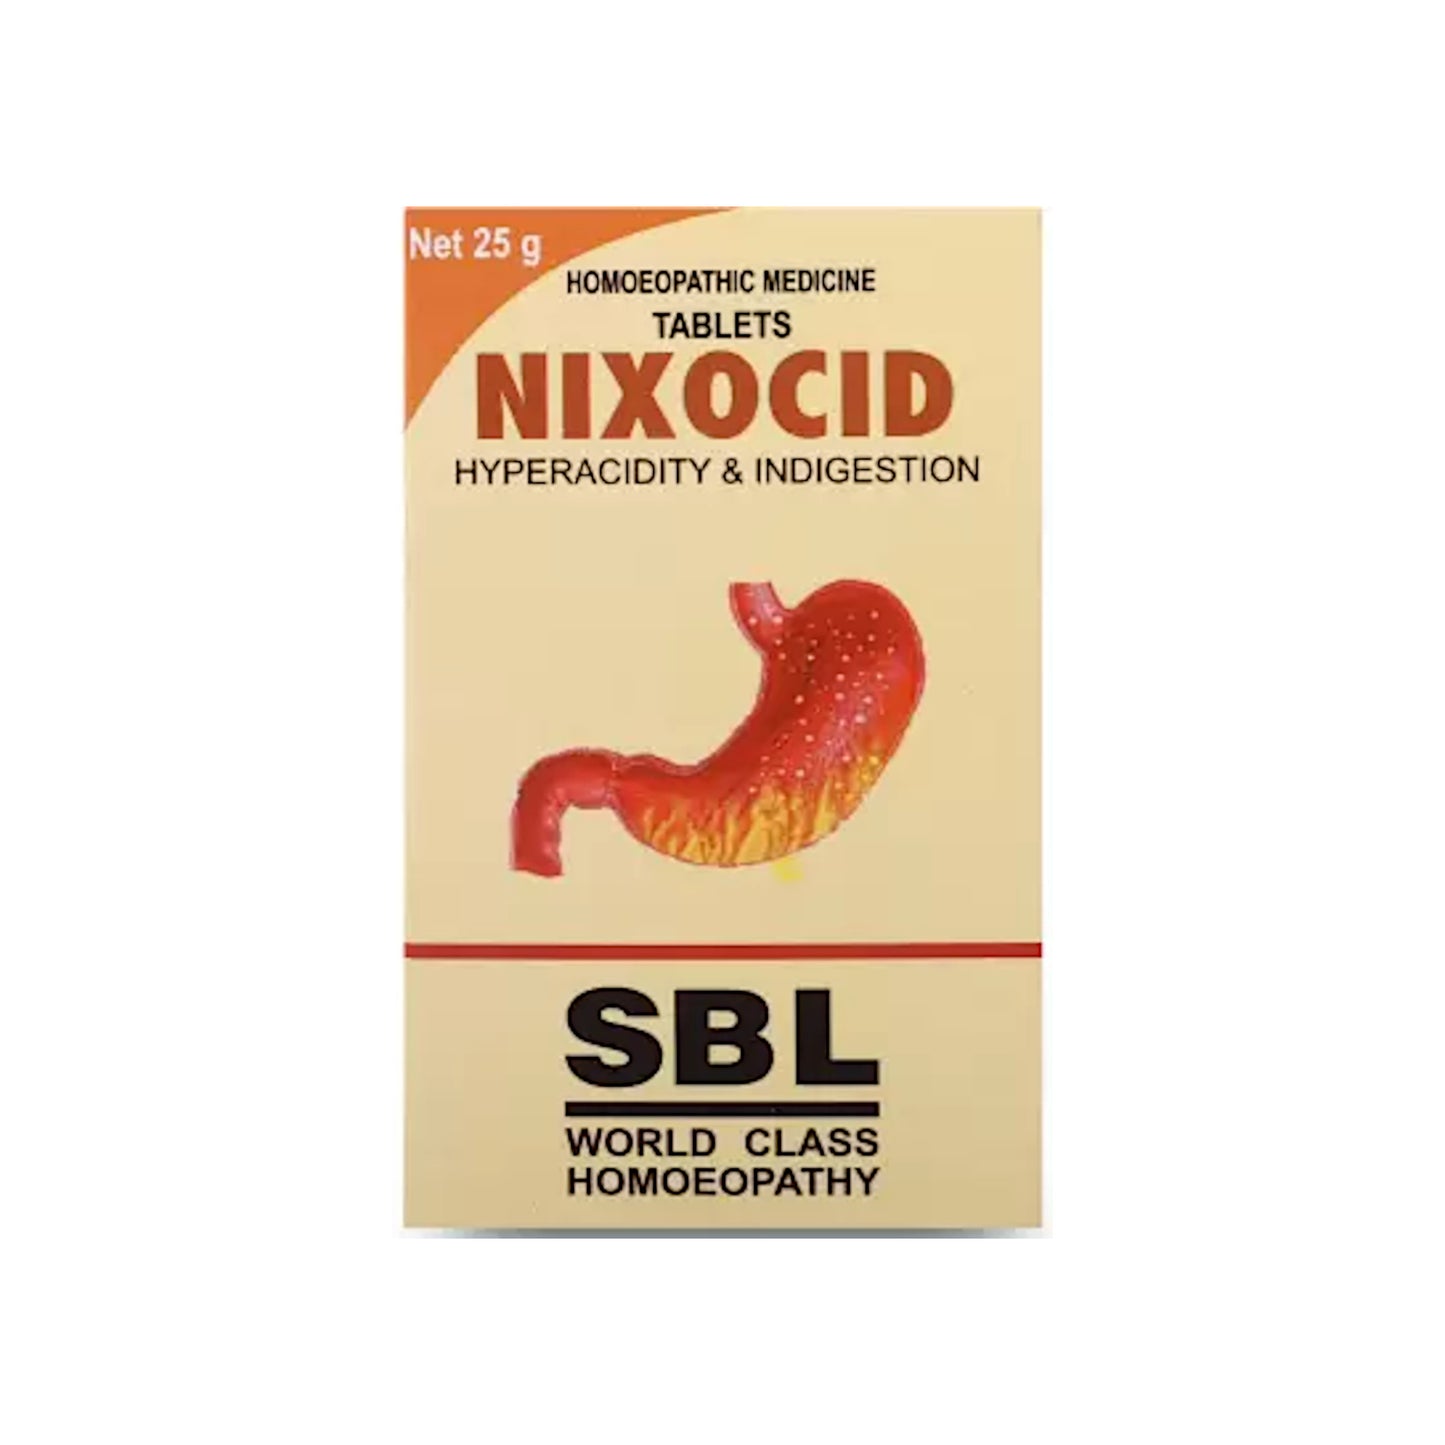  Image: SBL Nixocid 250 Tablets - Homeopathic Relief for Hyperacidity."